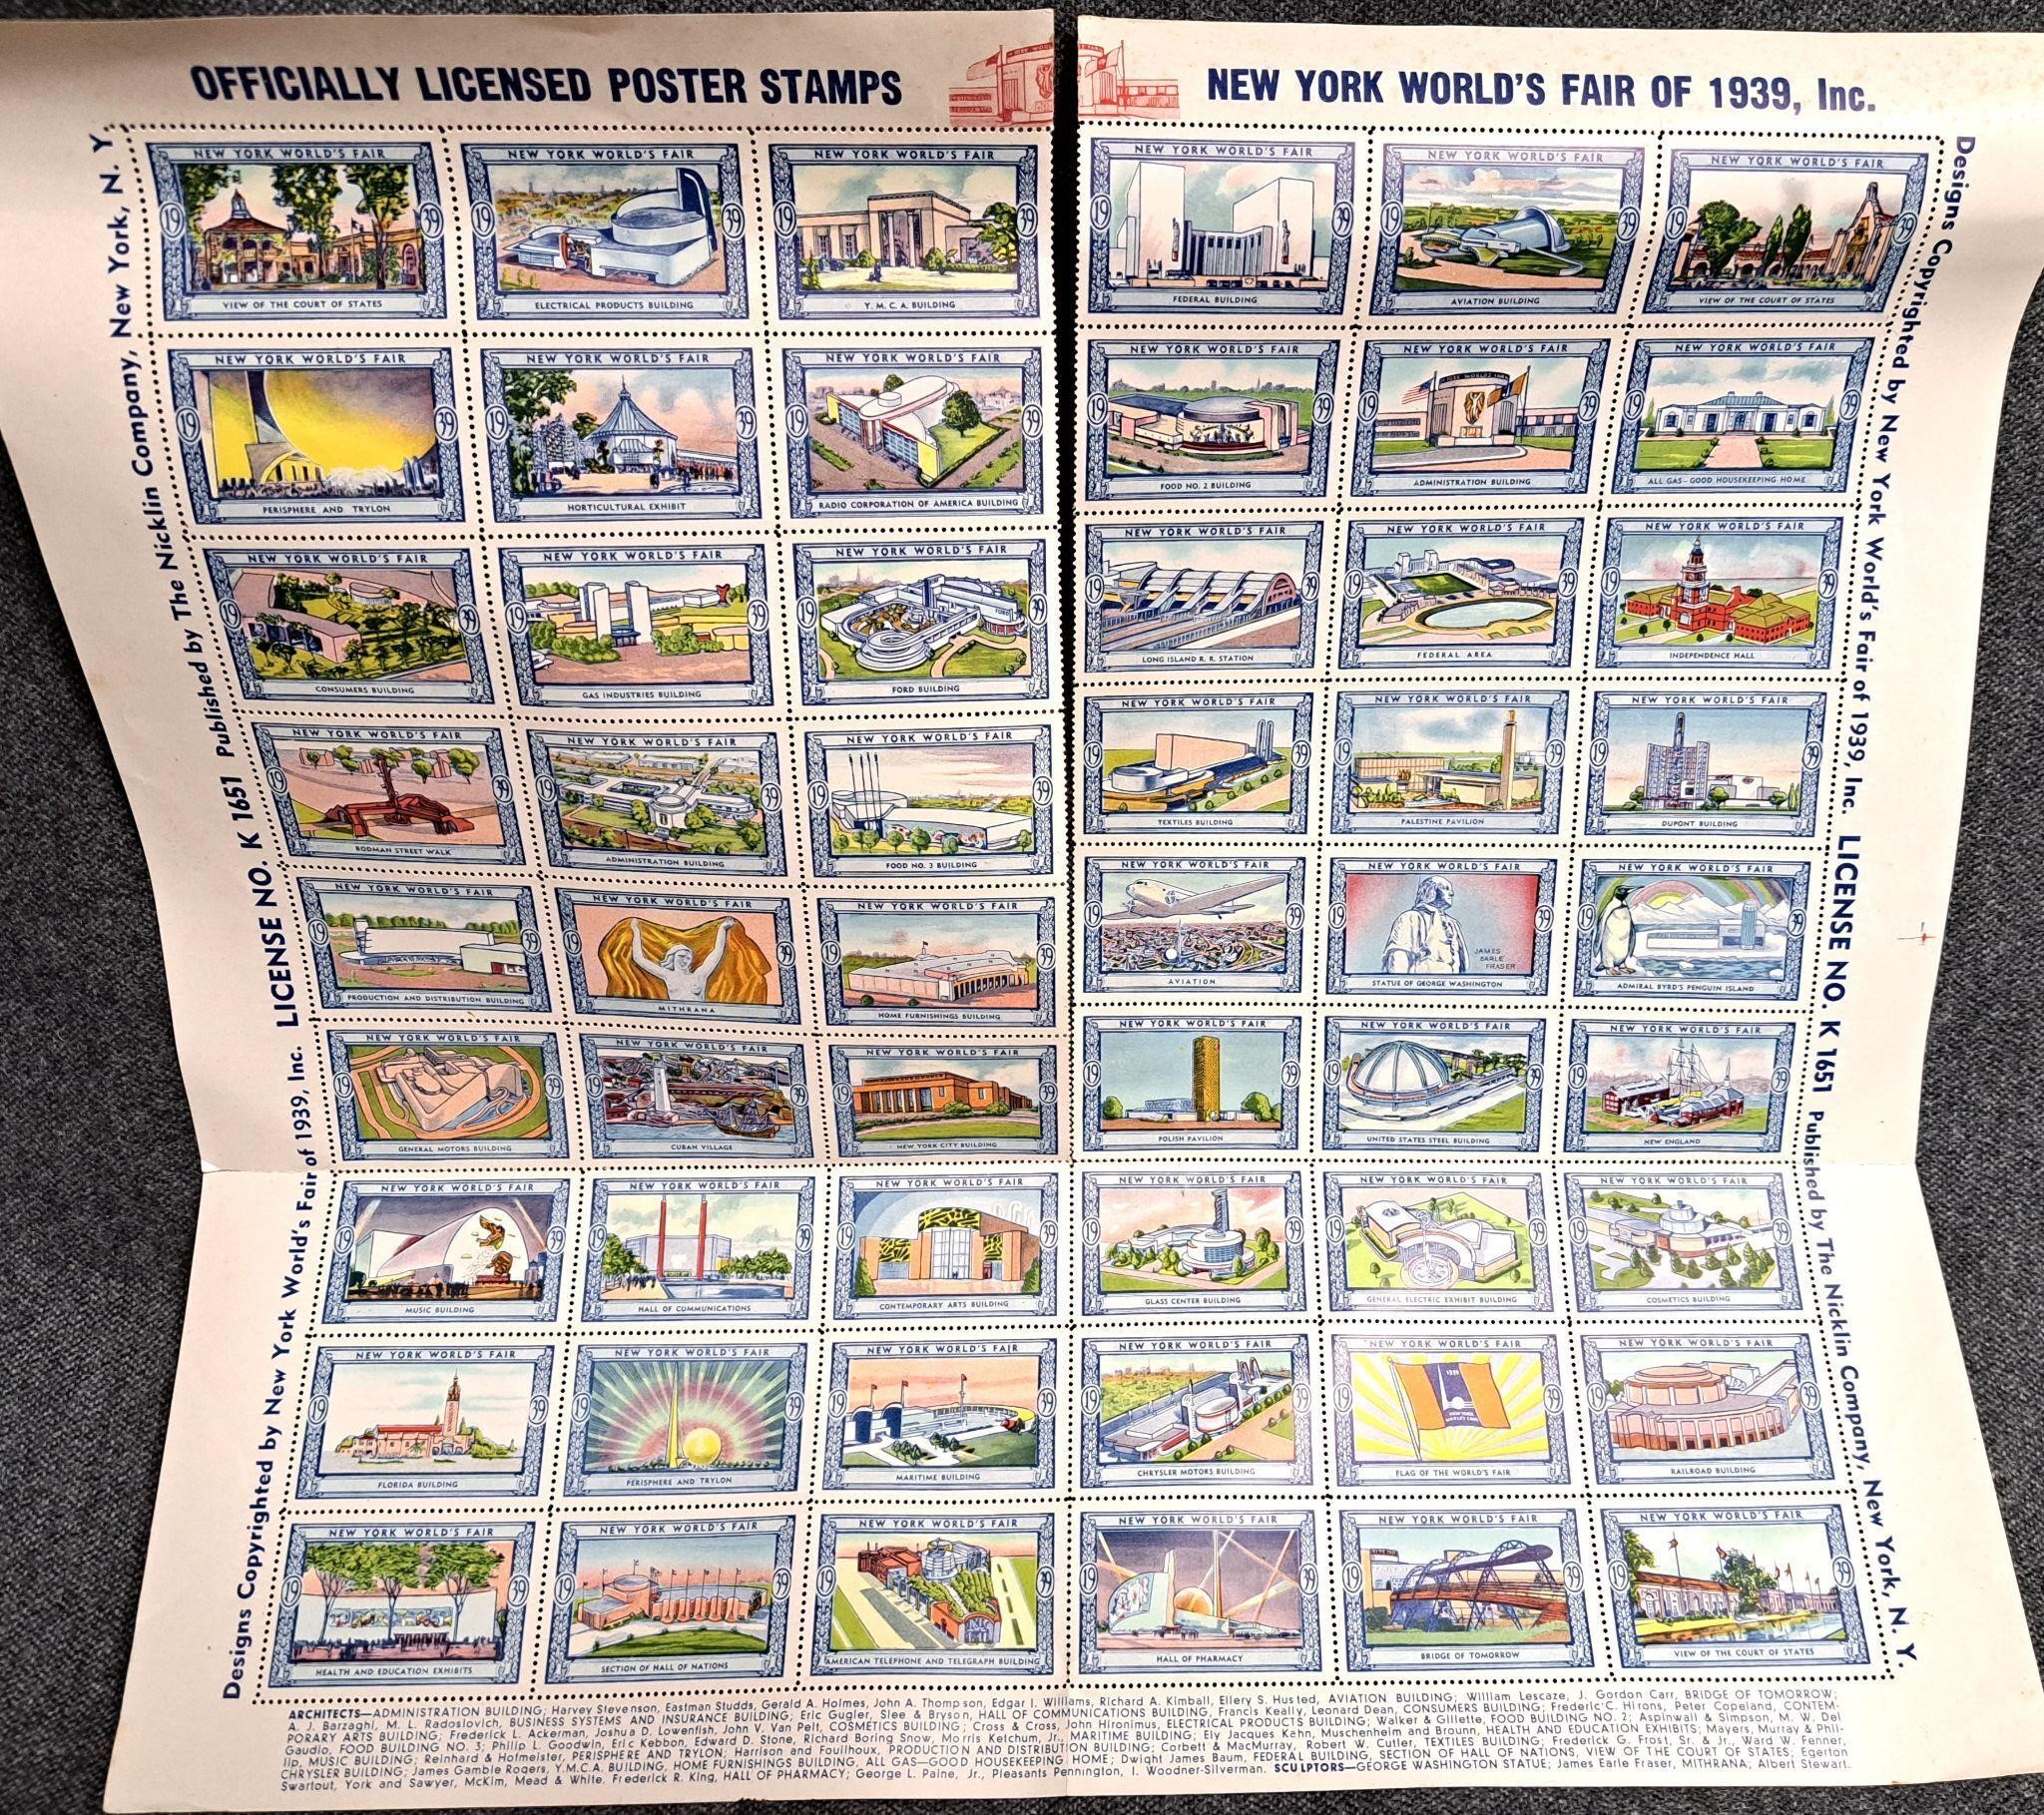 1939 WORLDS FAIR US POSTAGE STAMPS SHEET